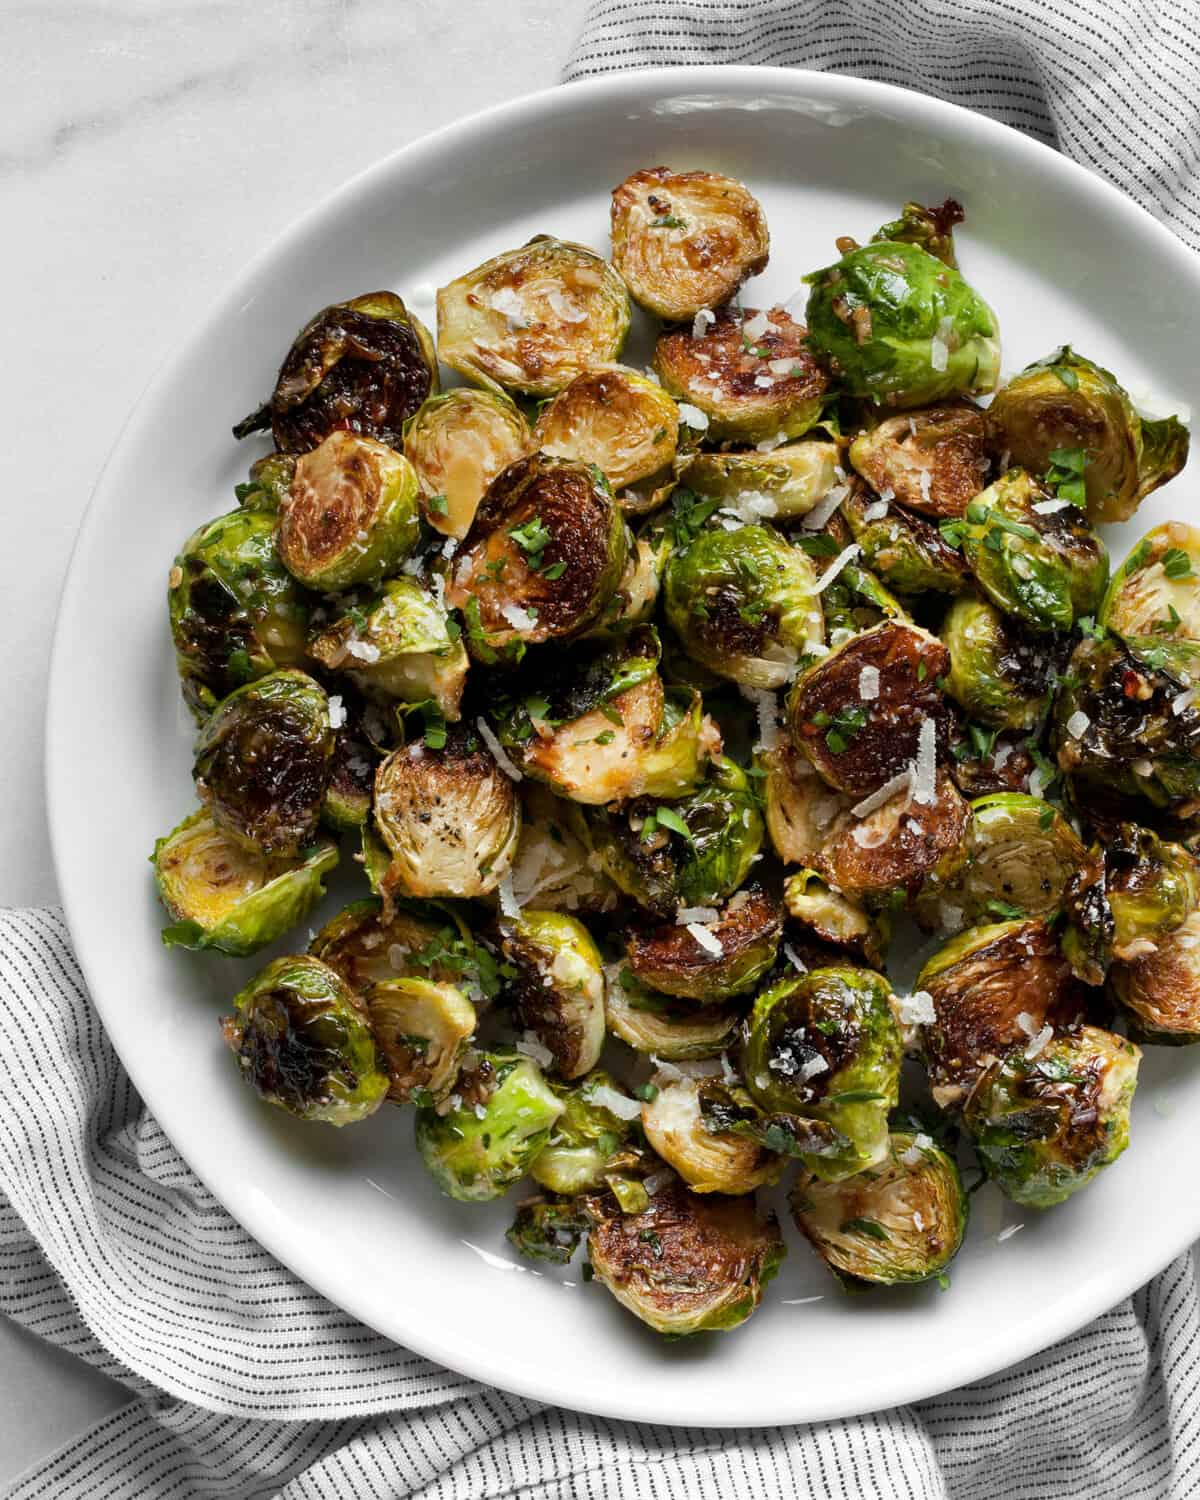 Caramelized brussels sprouts on a plate.